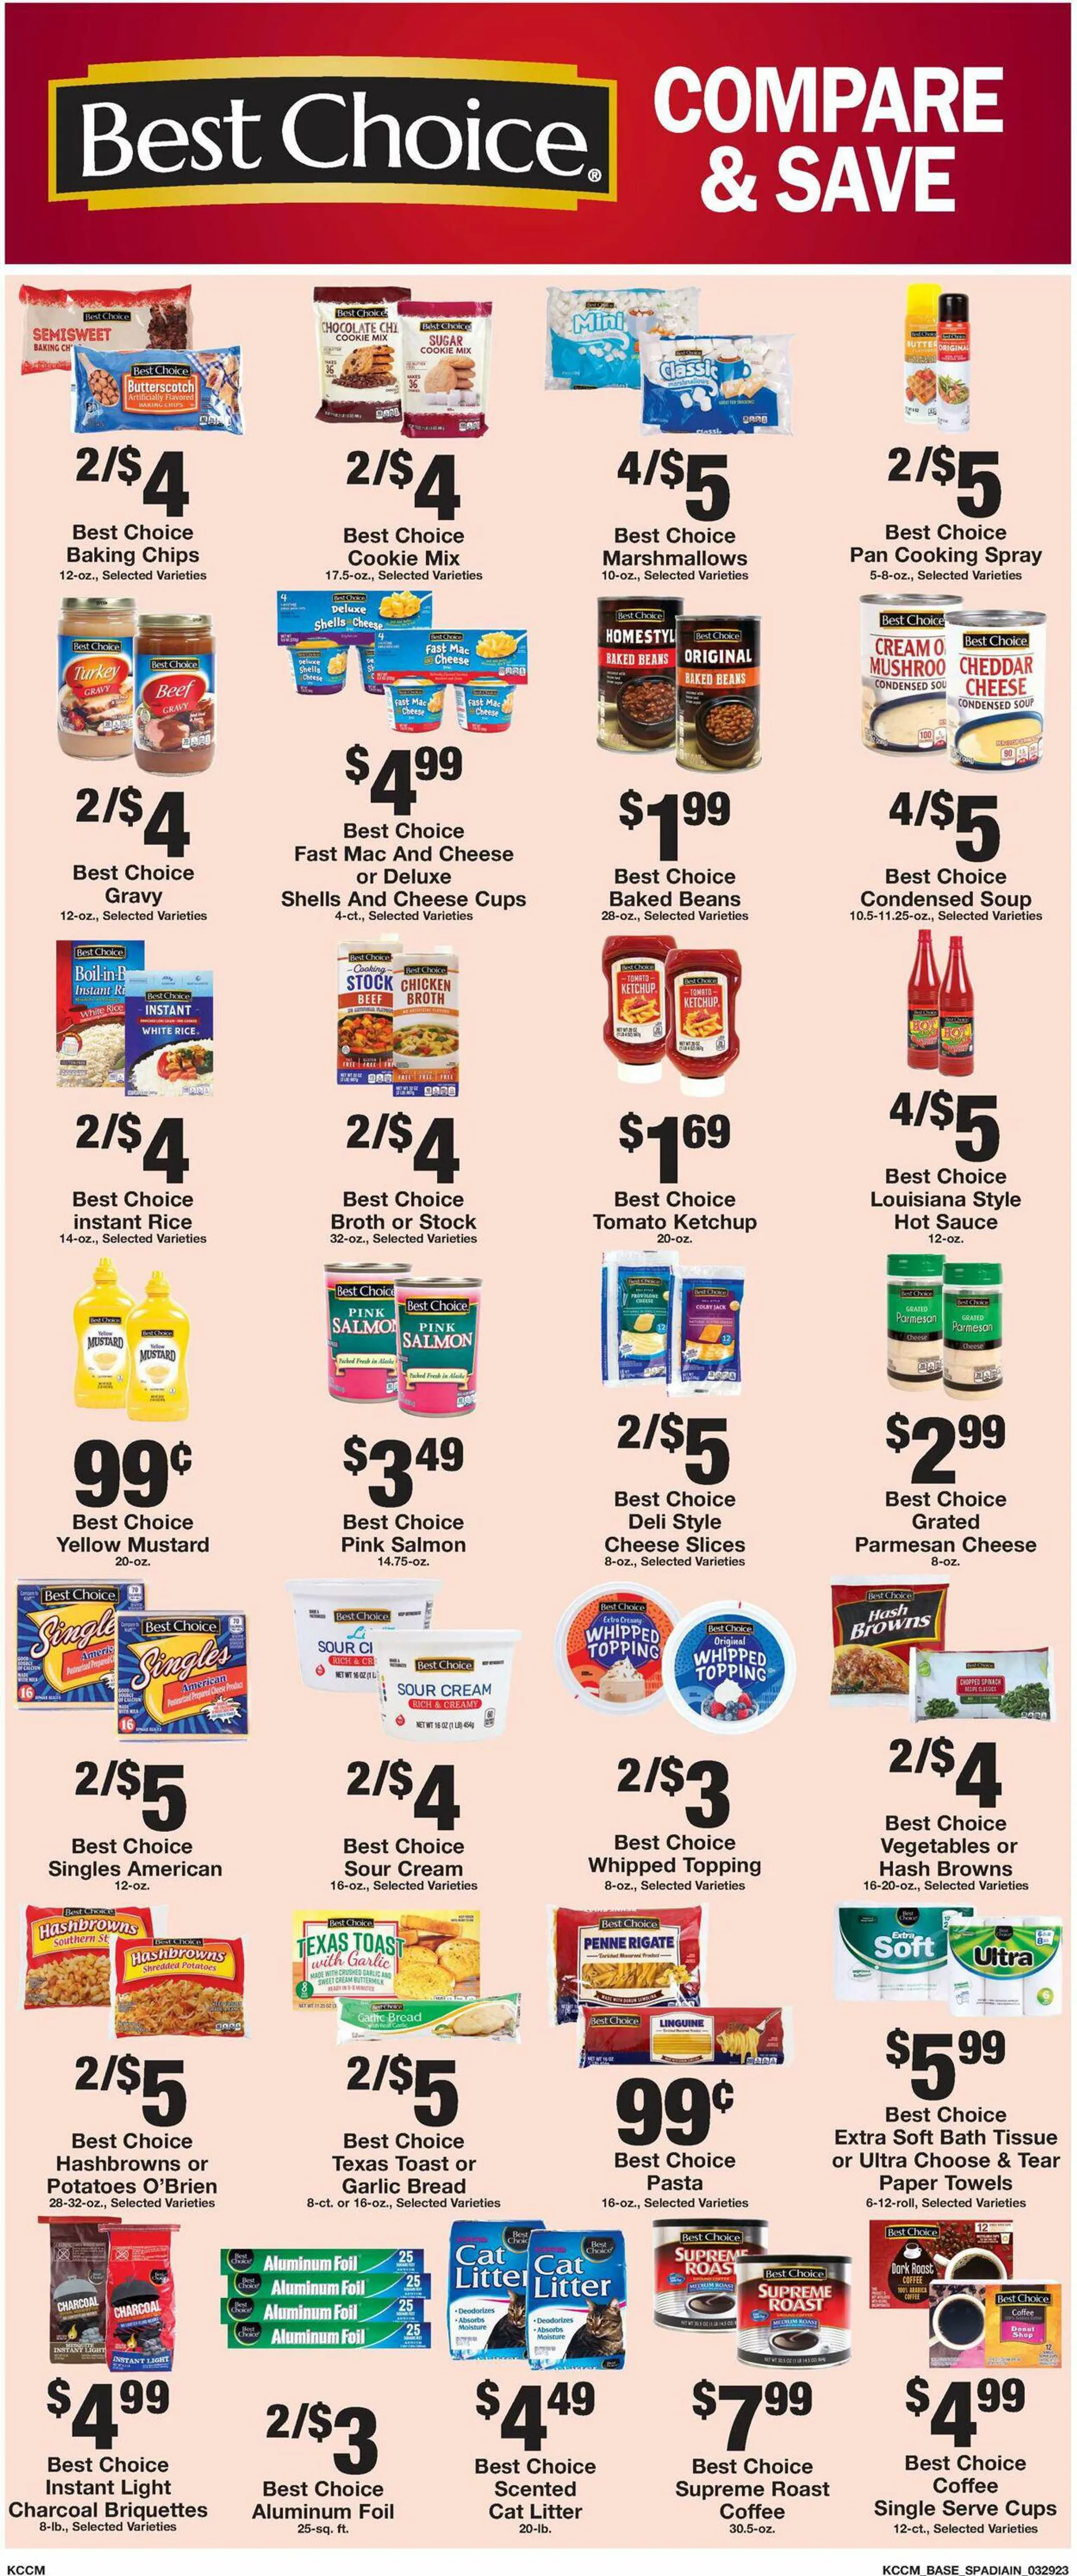 Country Mart Current weekly ad - 6